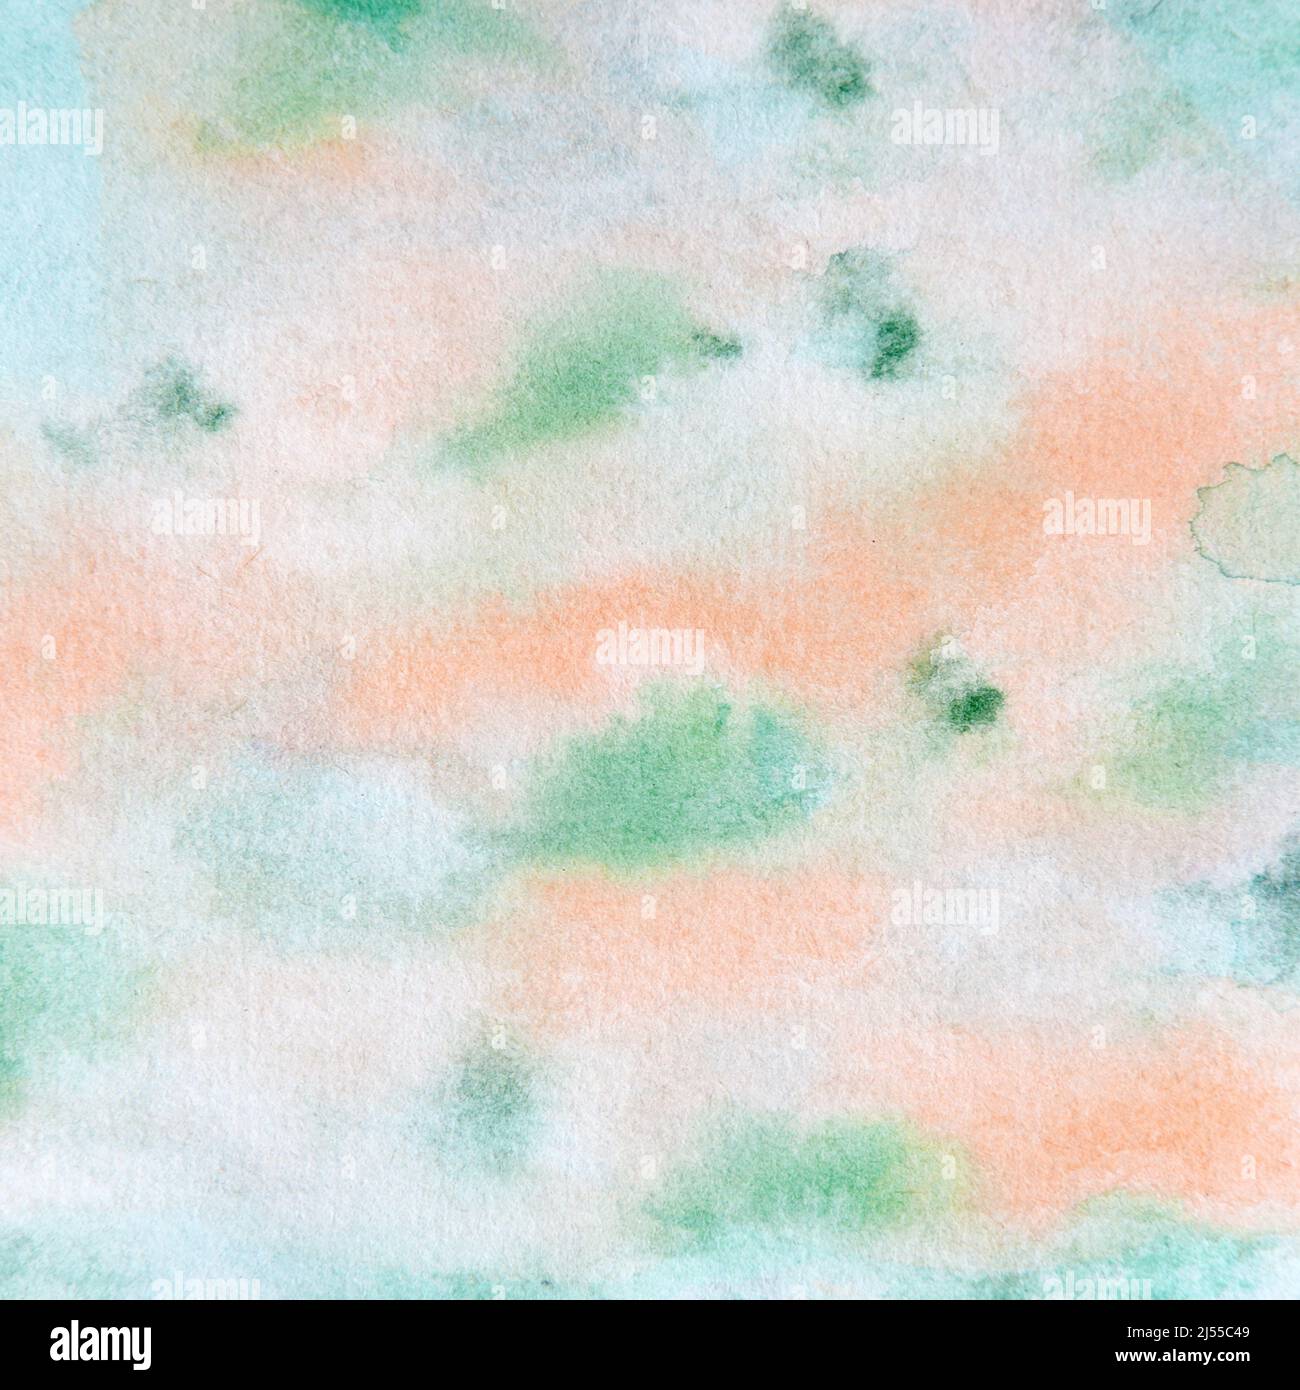 Watercolor background green coral peach a handpainted design element with paint textures. Stock Photo